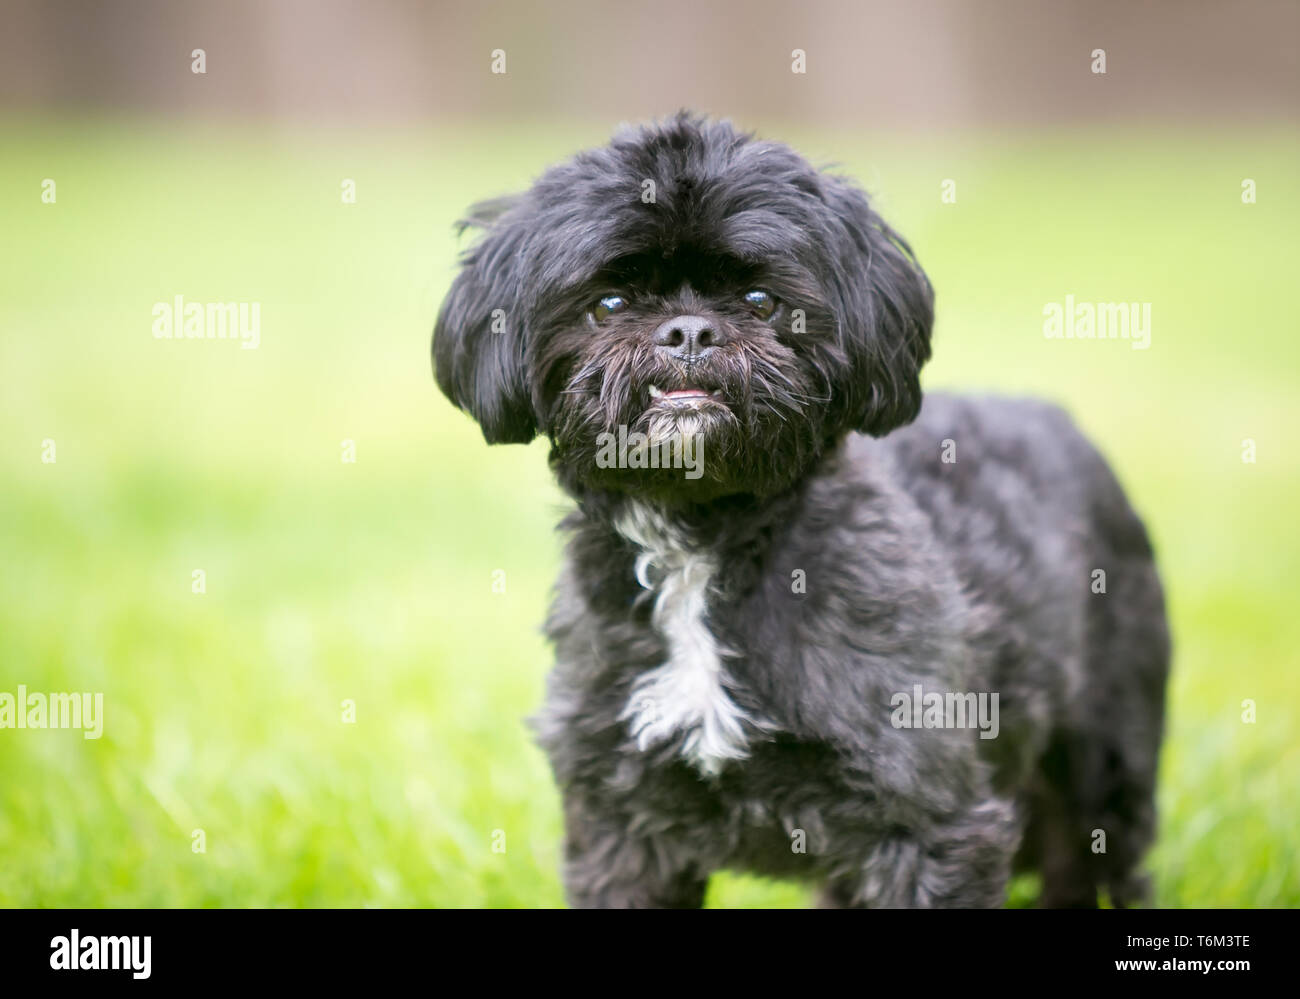 A black Shih Tzu mixed breed dog standing outdoors Stock Photo - Alamy